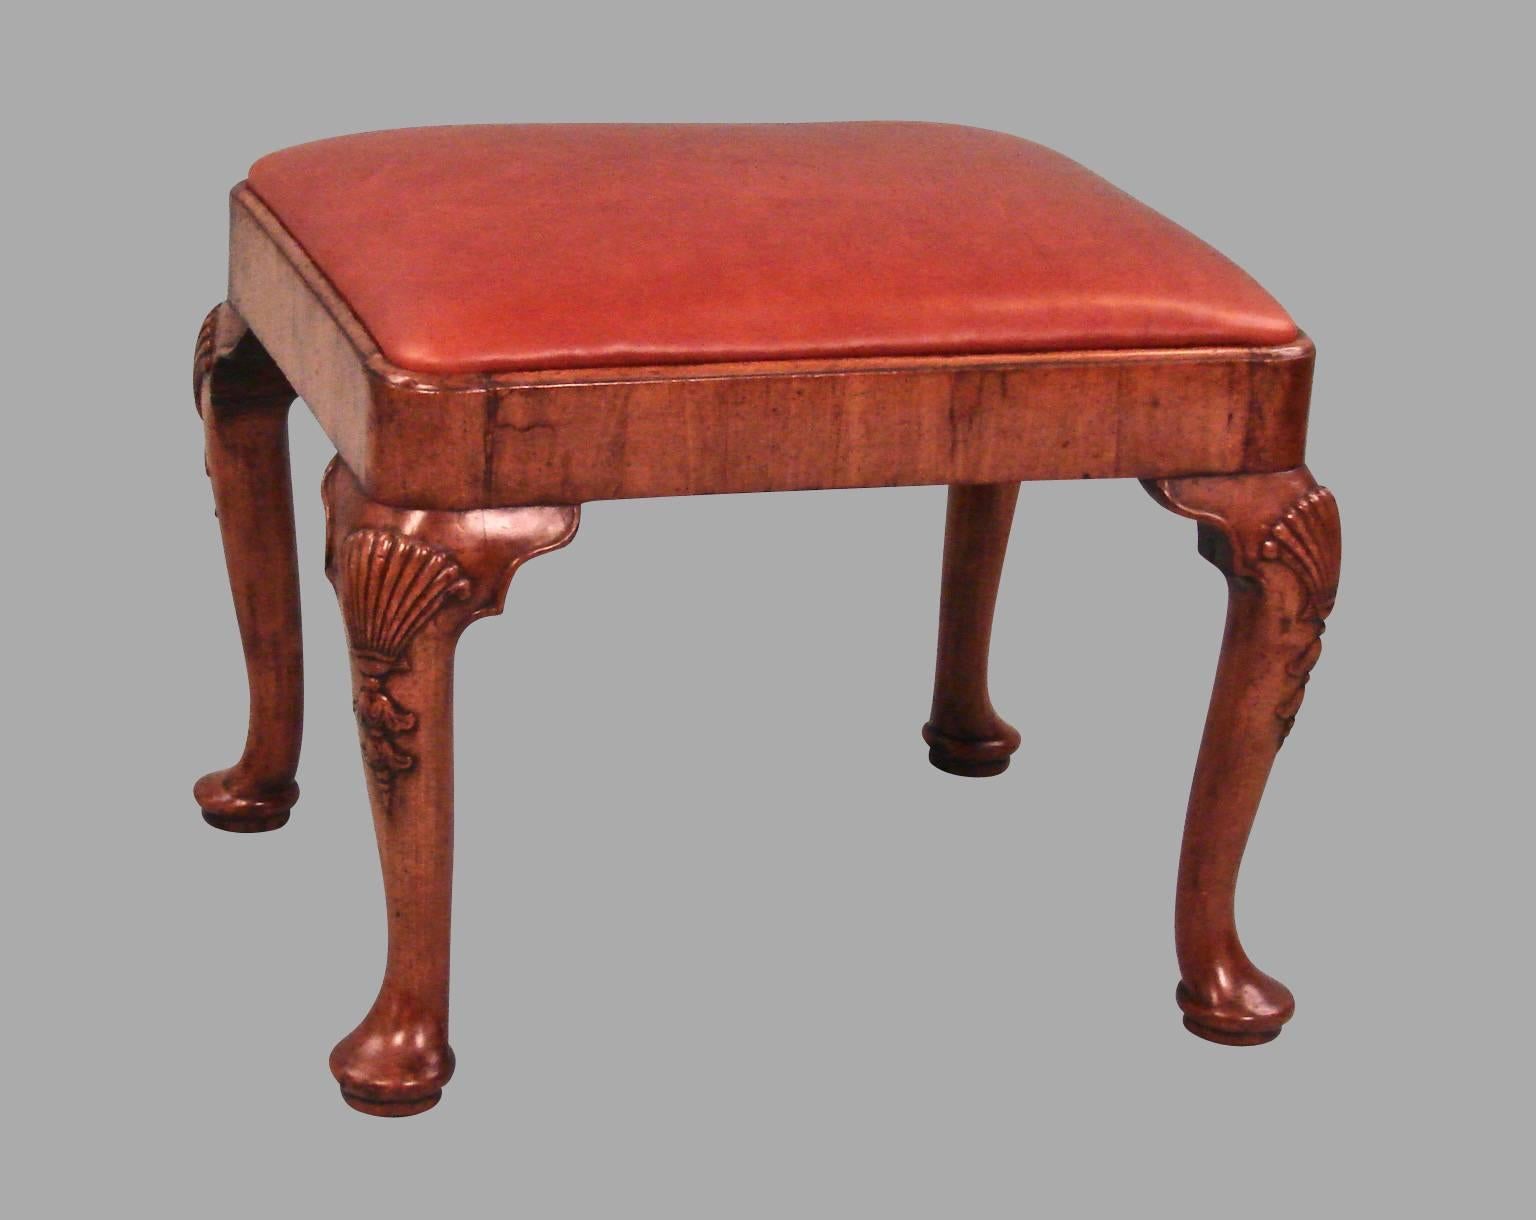 An English George II style walnut veneered stool, the cabriole legs with shell carved knees ending in bell flowers and terminating in pad feet, 19th century.